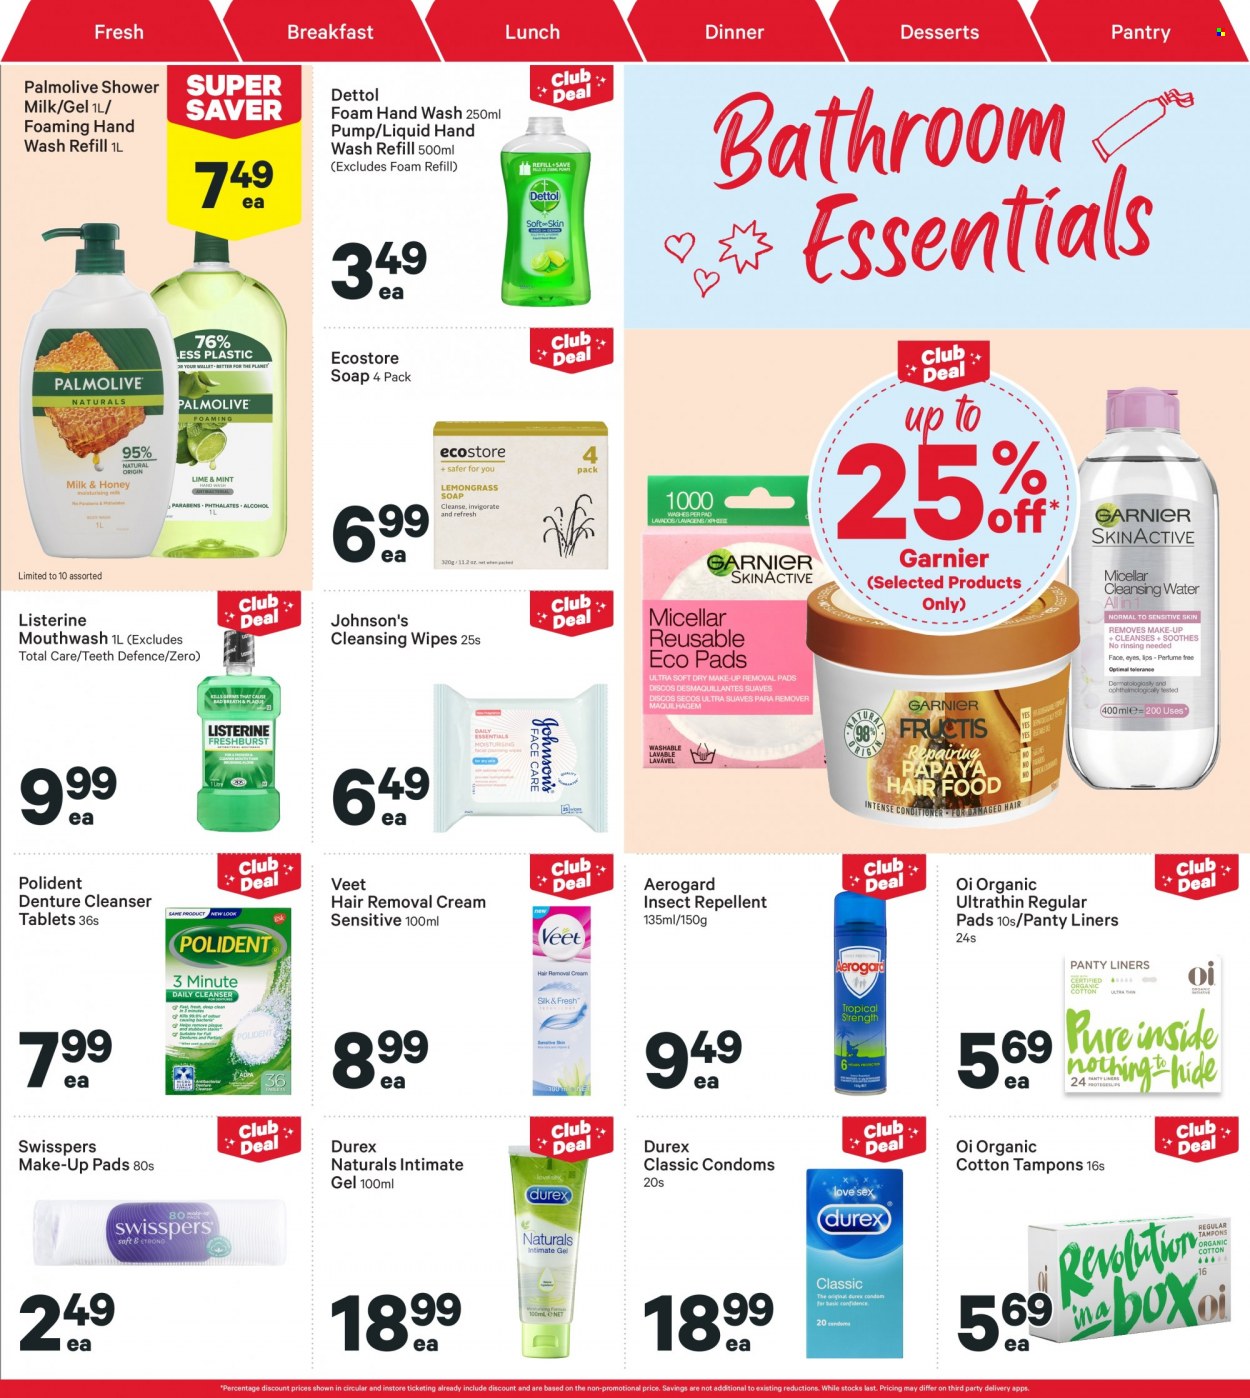 thumbnail - New World mailer - 23.01.2023 - 29.01.2023 - Sales products - milk, cleansing wipes, wipes, Johnson's, Dettol, hand wash, Palmolive, soap, Listerine, mouthwash, Polident, tampons, cleanser, Garnier, hair removal, Veet, repellent, makeup. Page 31.